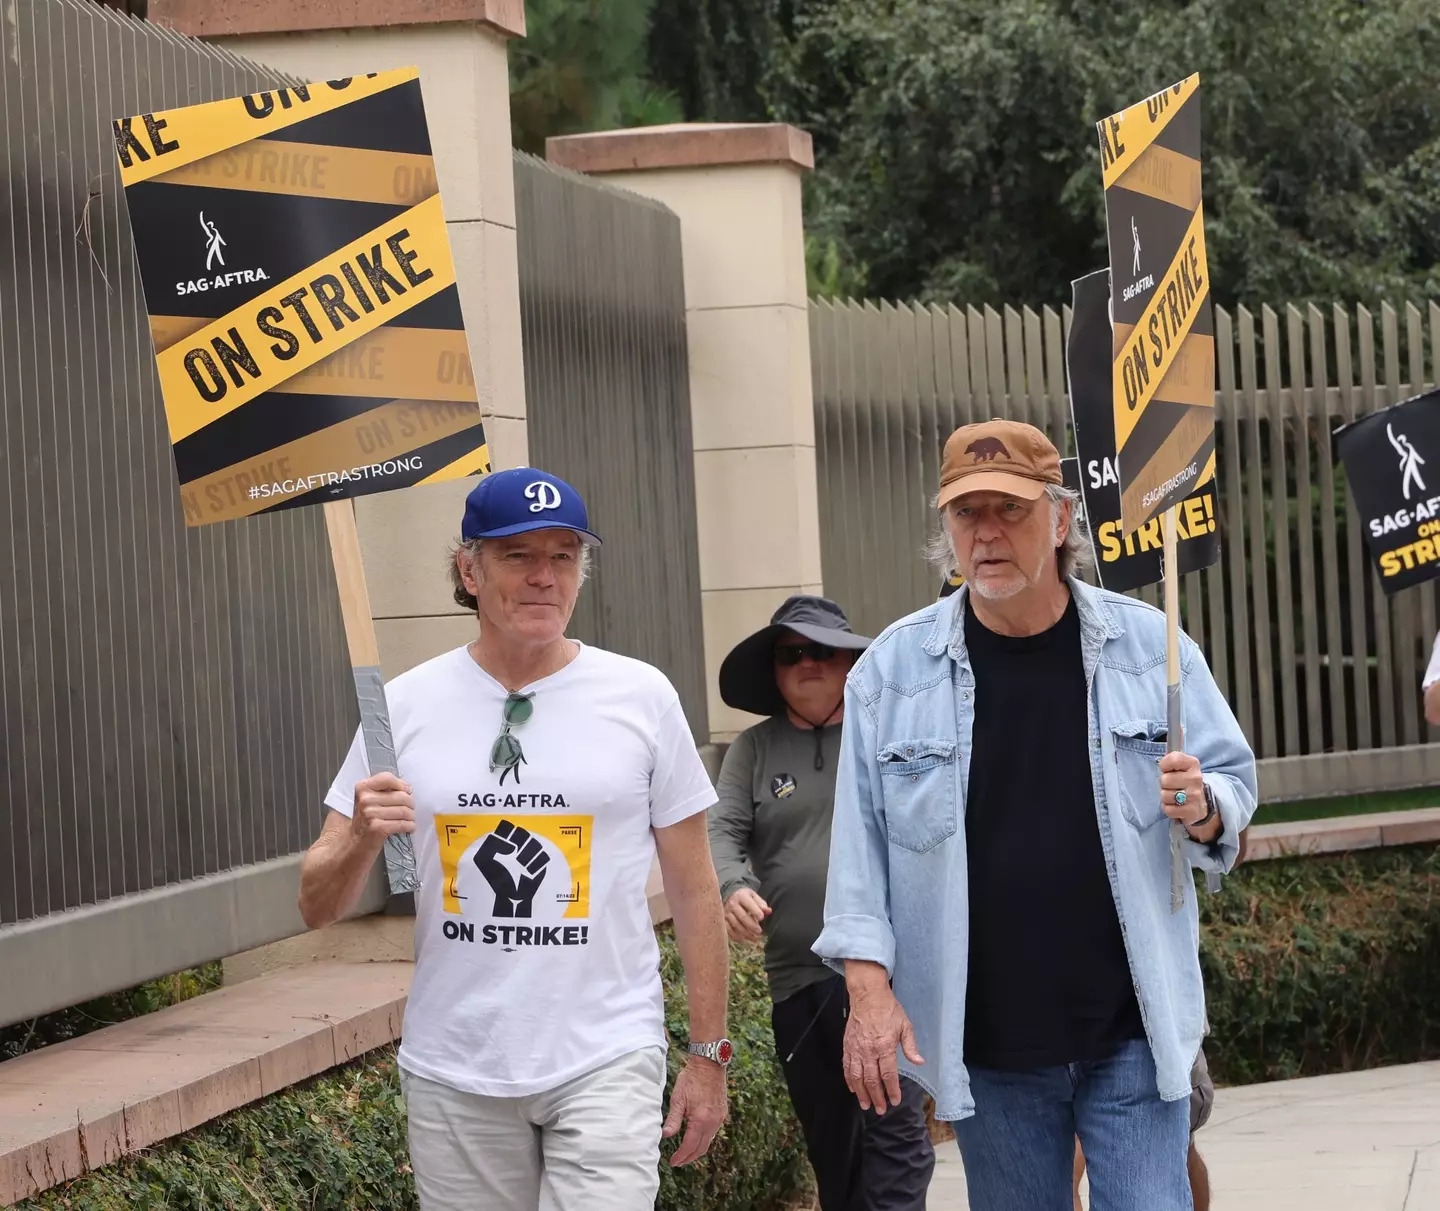 SAG-AFTRA are on strike over pay and image rights concerns.